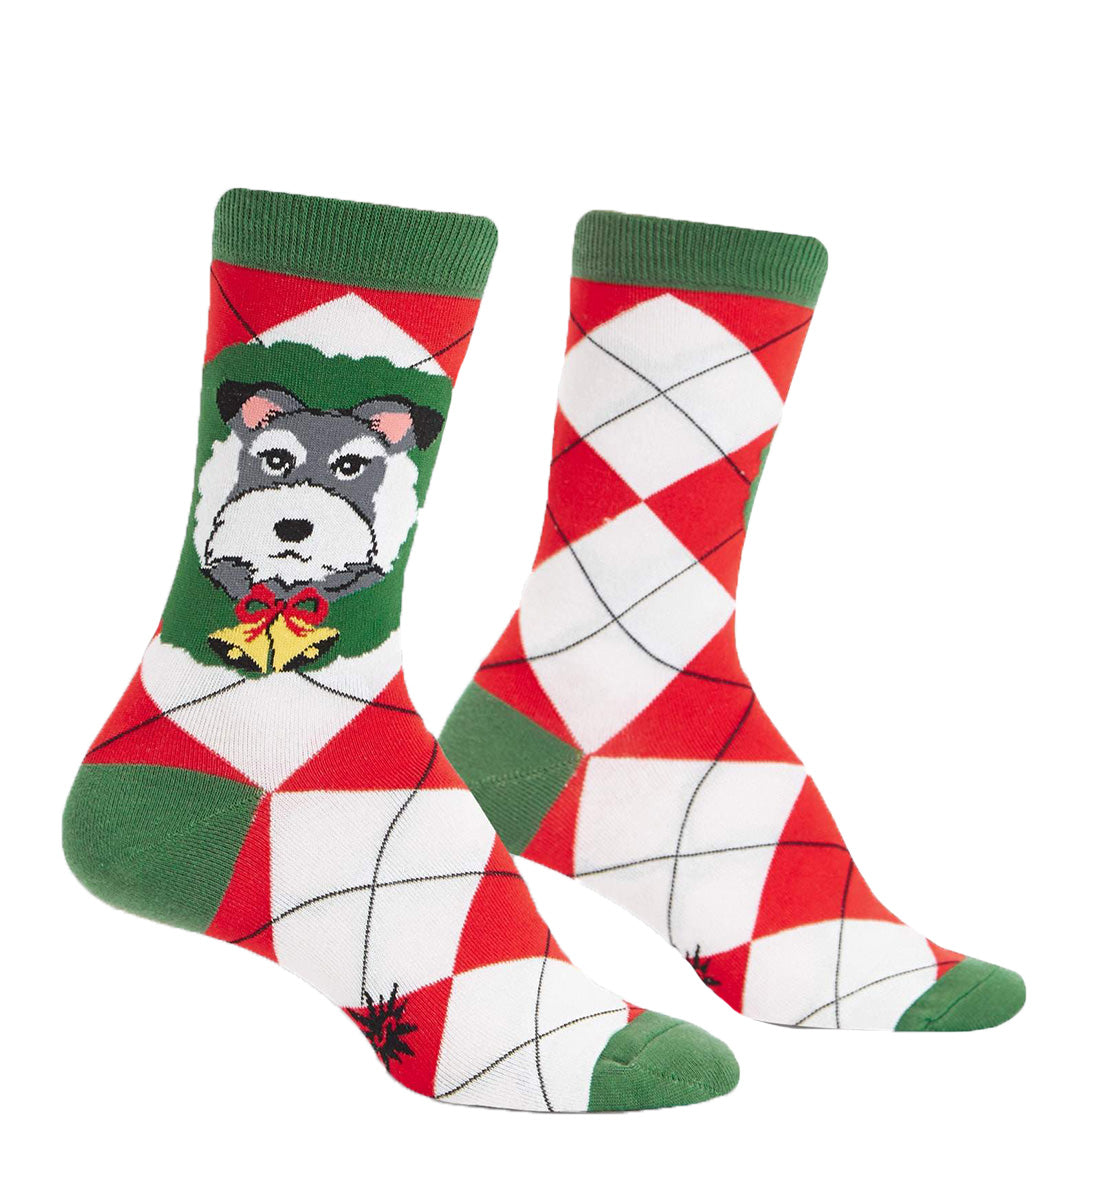 SOCK it to me Women's Crew Socks (w0223)- Deck The Paws - Deck The Paws,One Size